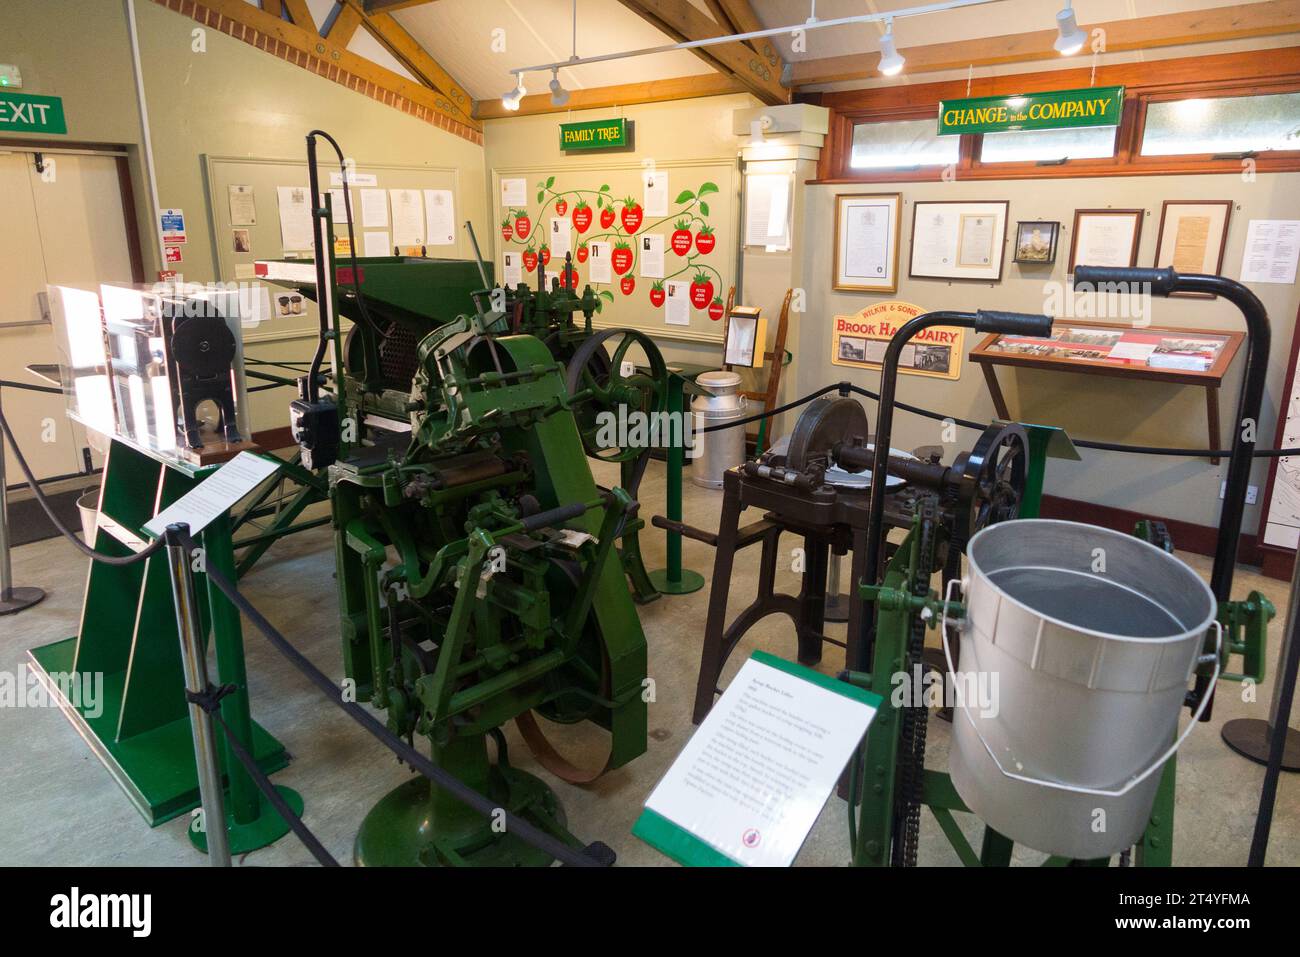 Interior display of fruit process, implements, information; Jam Museum, Wilkin & Sons Limited, manufacturer of preserves since 1885, Tiptree, Essex UK Stock Photo